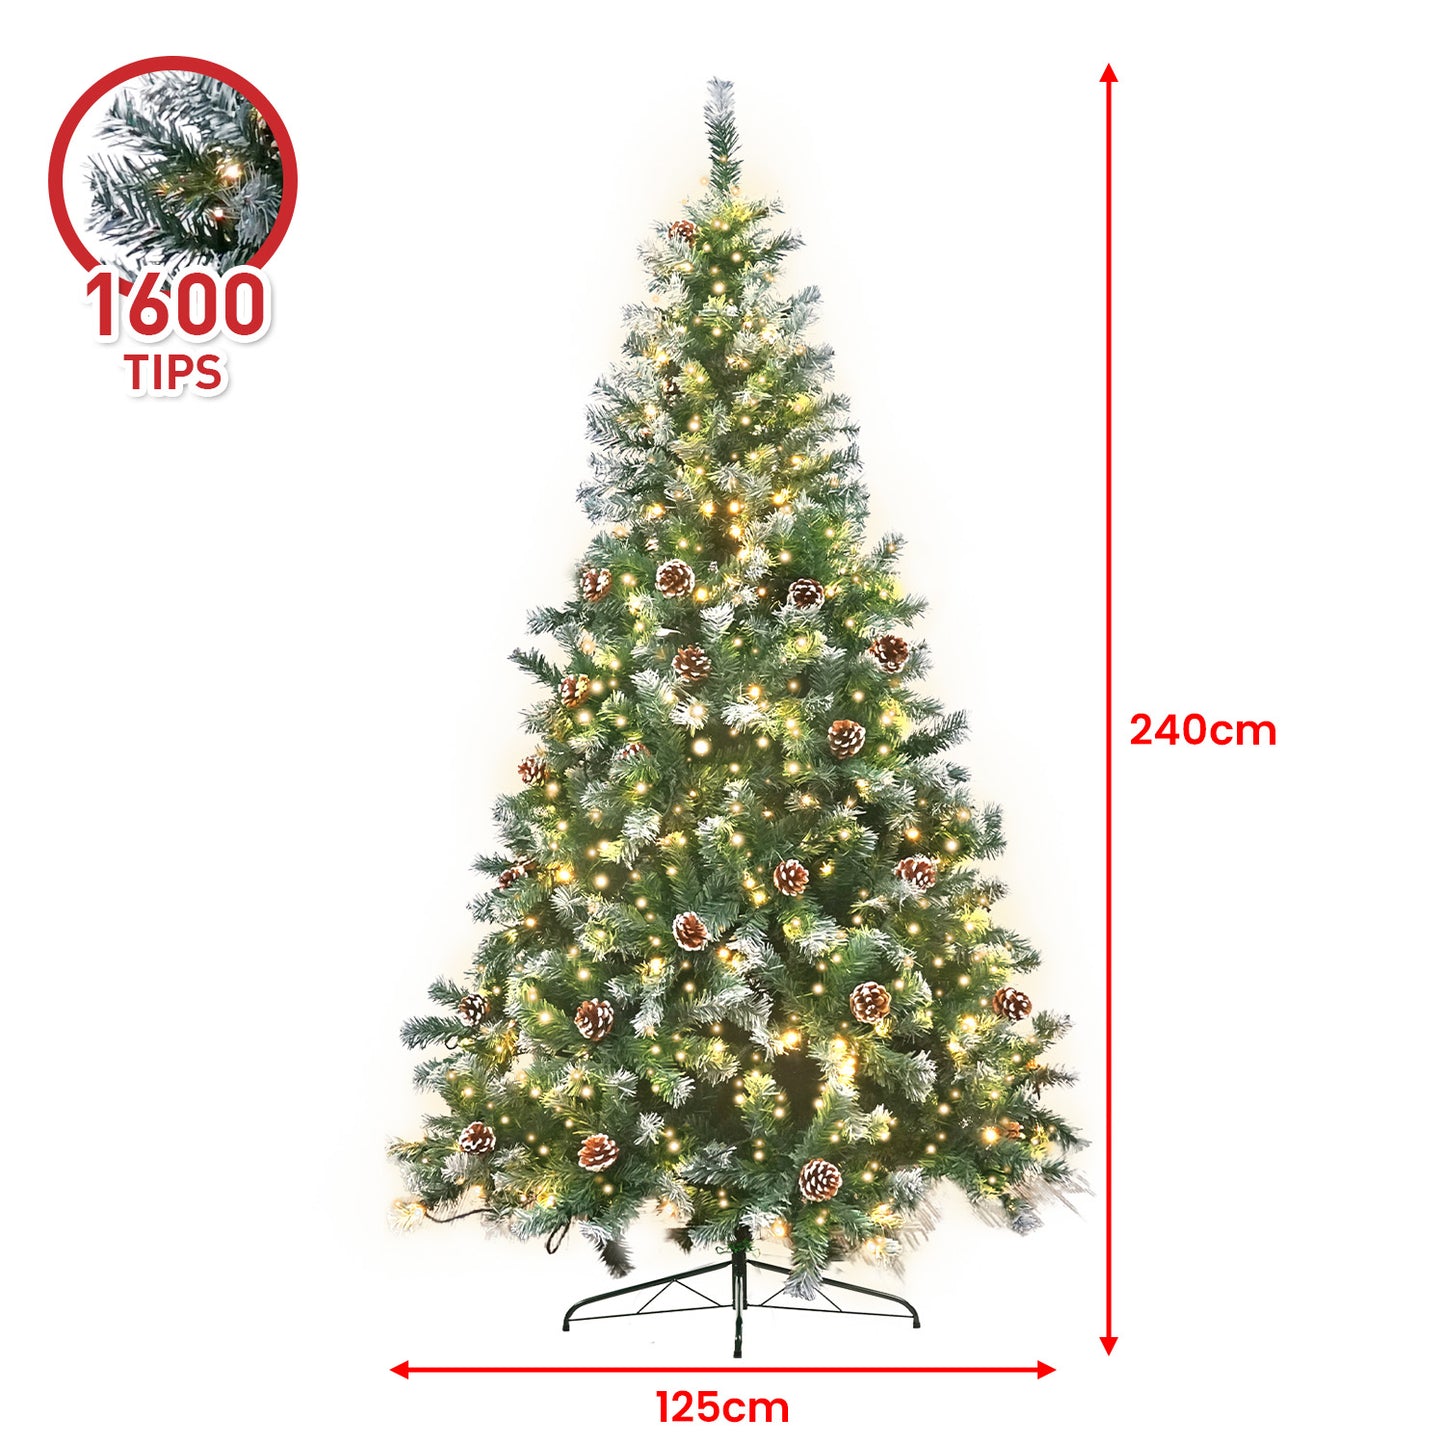 Christabelle 2.4m Pre Lit LED Christmas Tree with Pine Cones